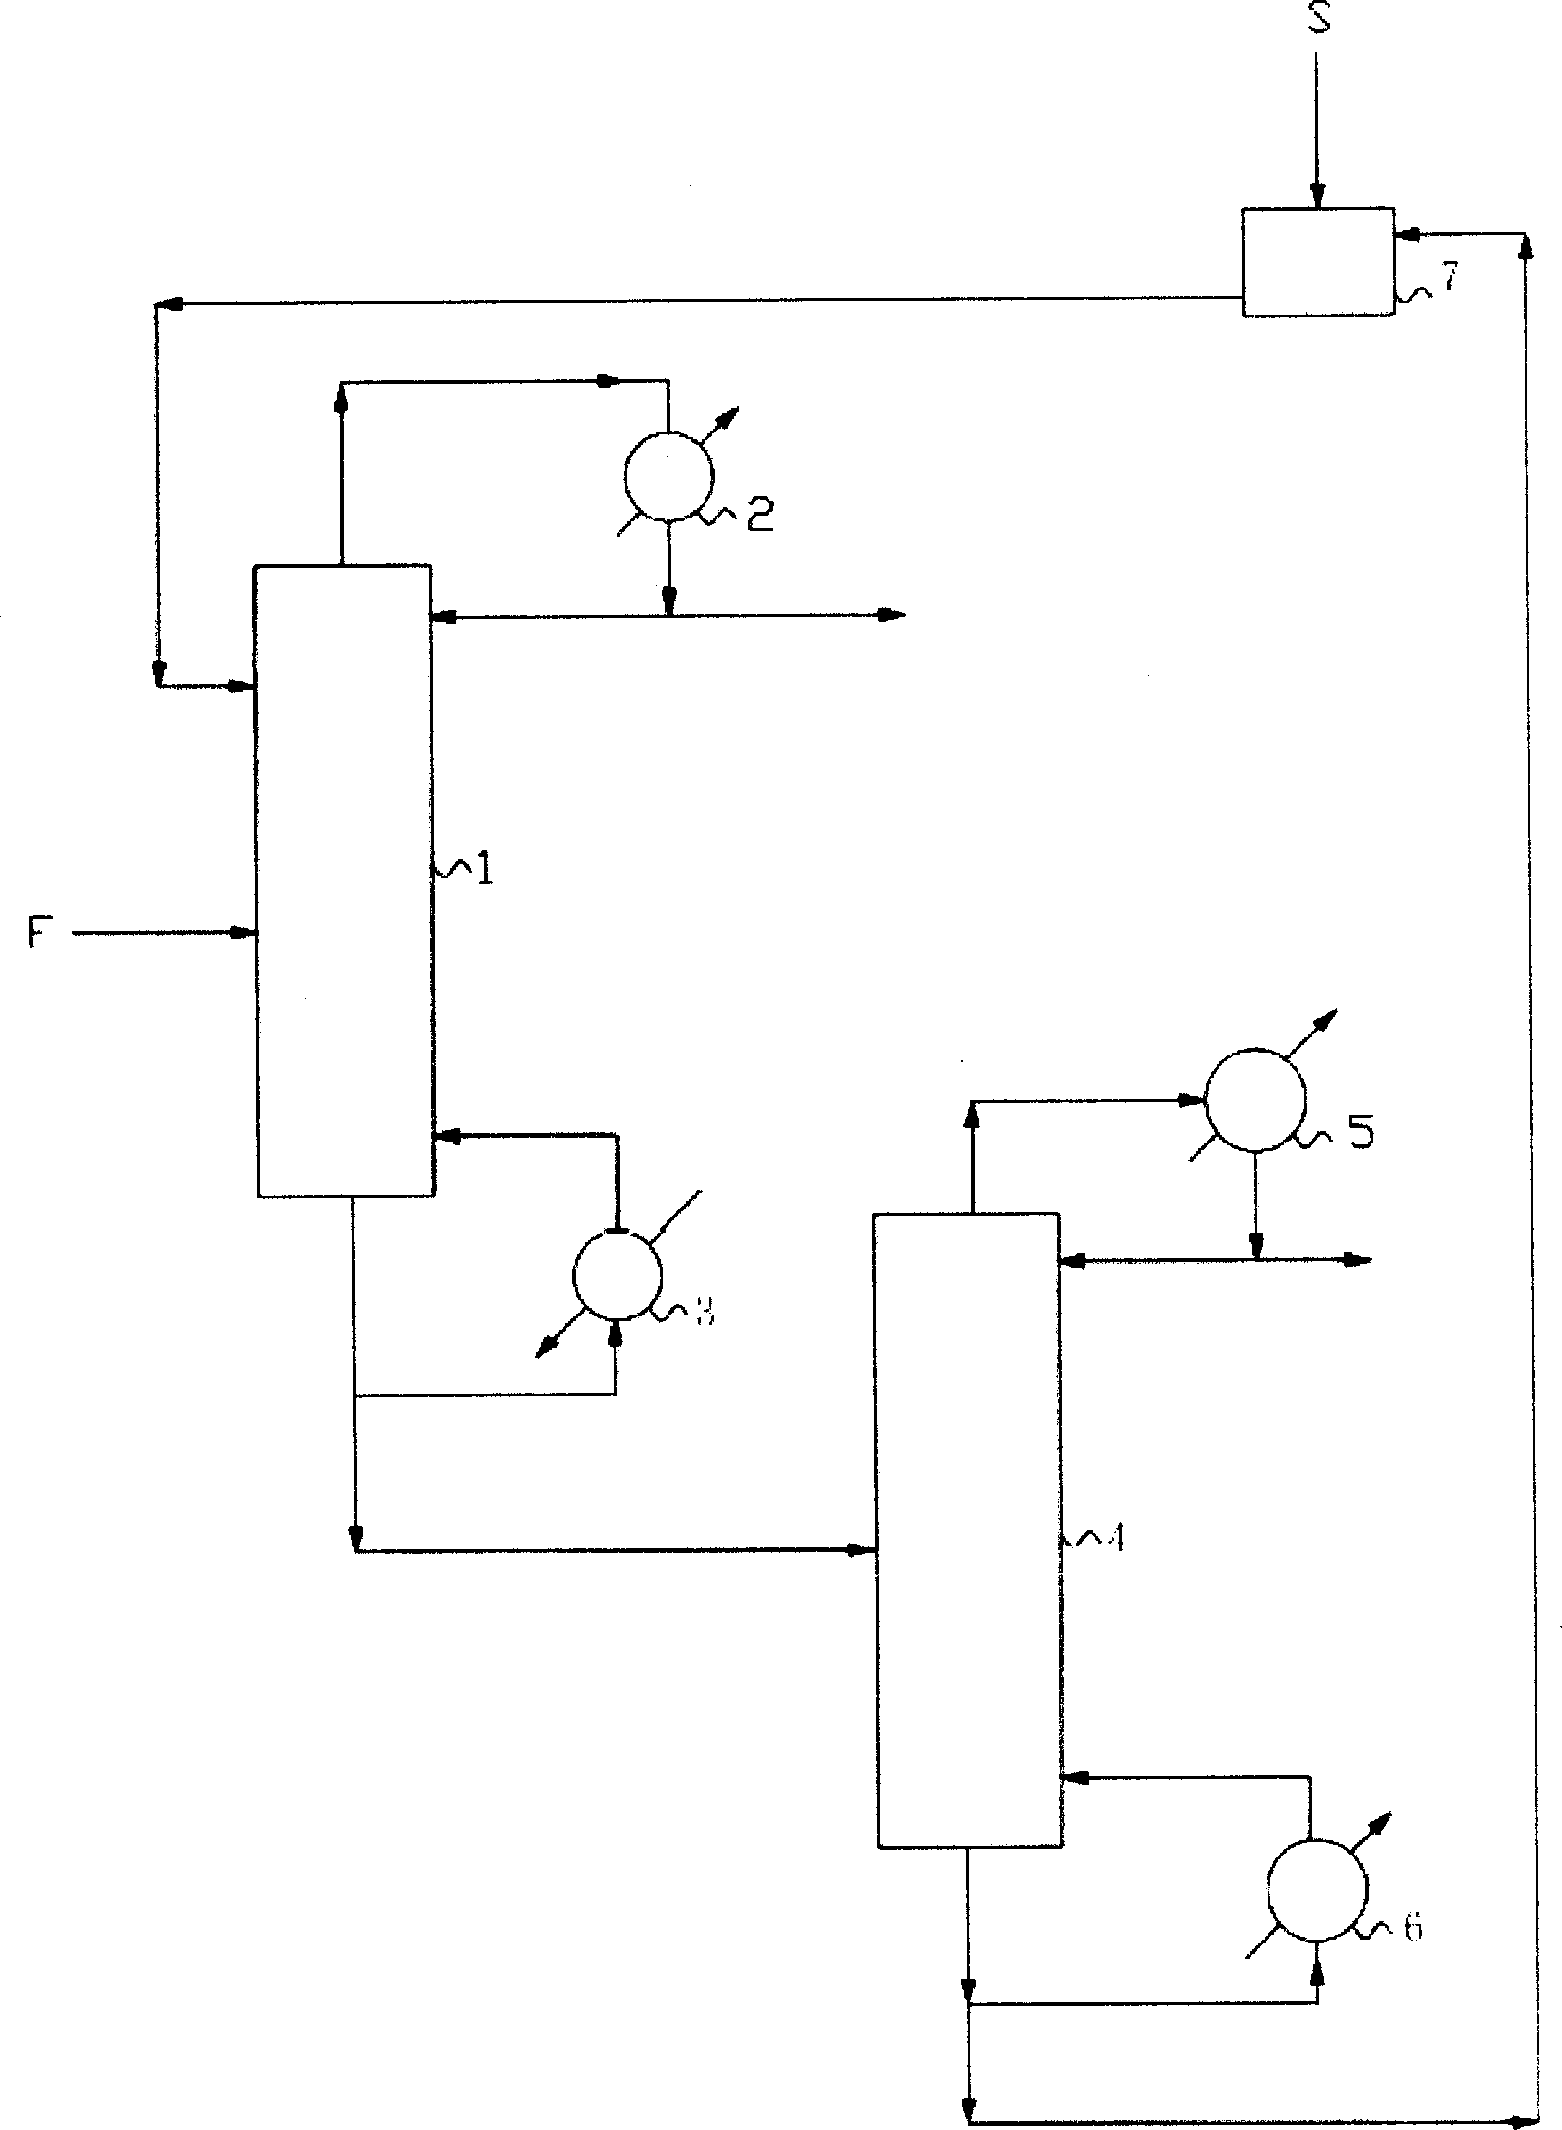 Method for separating acetonitrile-methylbenzene azeotropic mixture by continuous extractive distillation